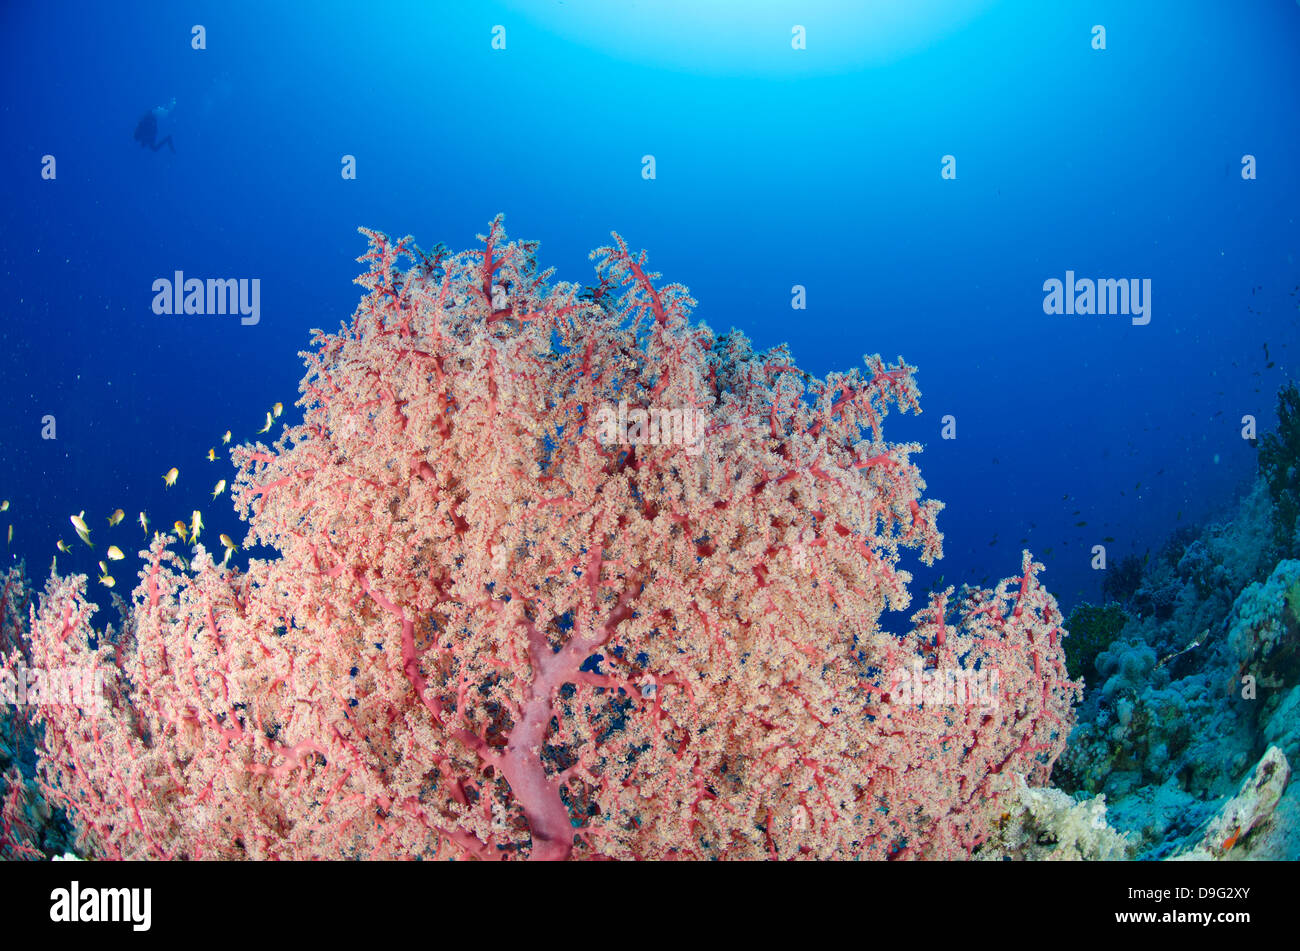 Splendid knotted fan coral  (Acabaria splendens), Ras Mohammed National Park, Red Sea, Egypt, Africa Stock Photo